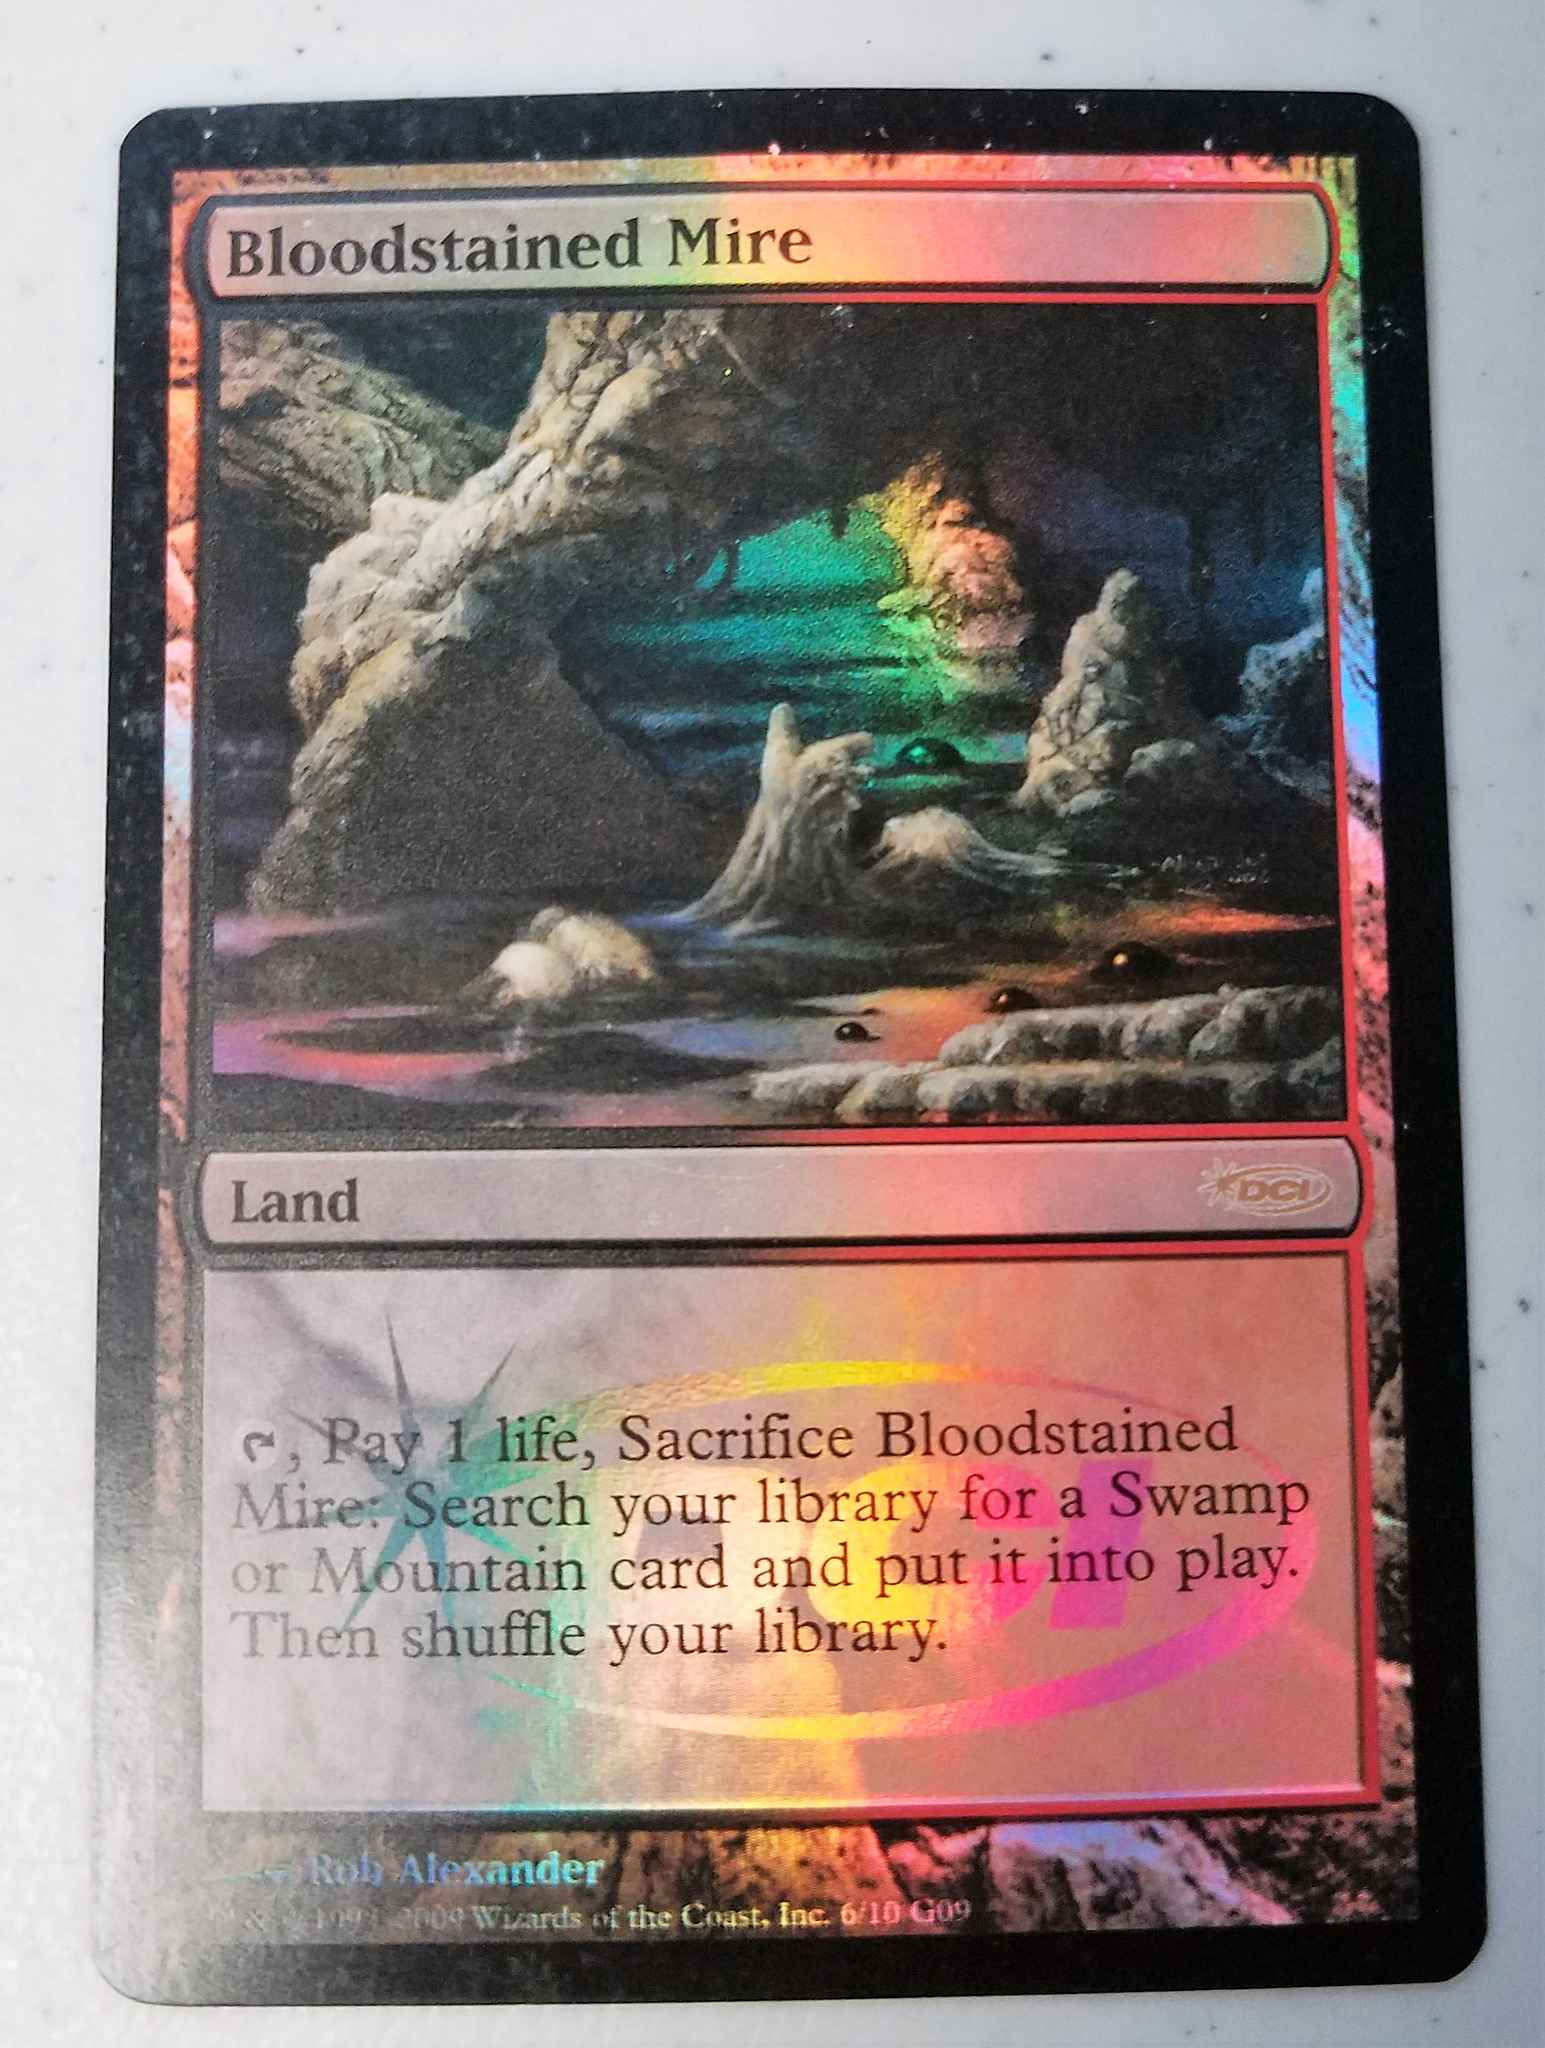 Bloodstained Mire Judge Promo Foil Hp Bloodstained Mire Judge Promos Magic The Gathering Online Gaming Store For Cards Miniatures Singles Packs Booster Boxes